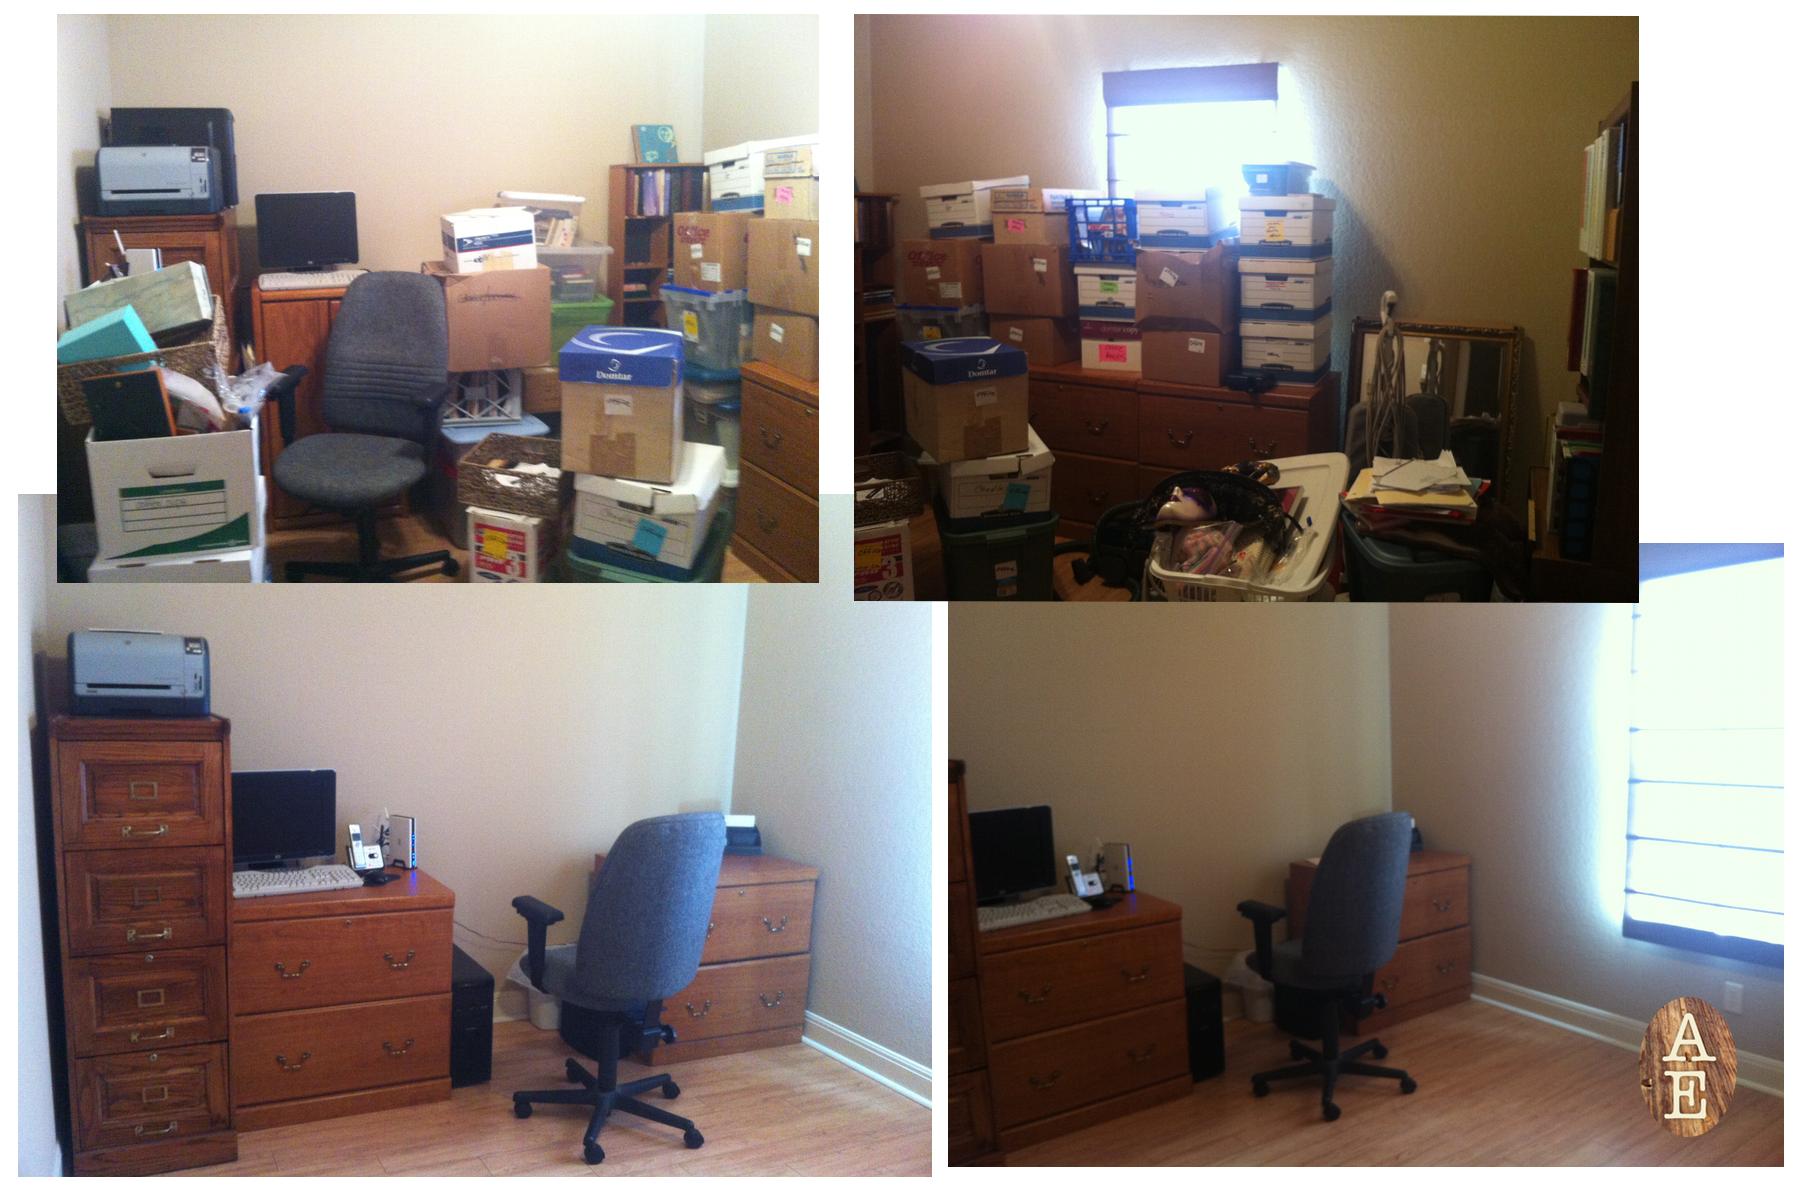 Before and in-progress of home office.  I believe you have to work with as much of a clean slate as possible.  I call this "the Clearing" stage. The "after" will be very different from "the clearing" look.  Stay tuned.